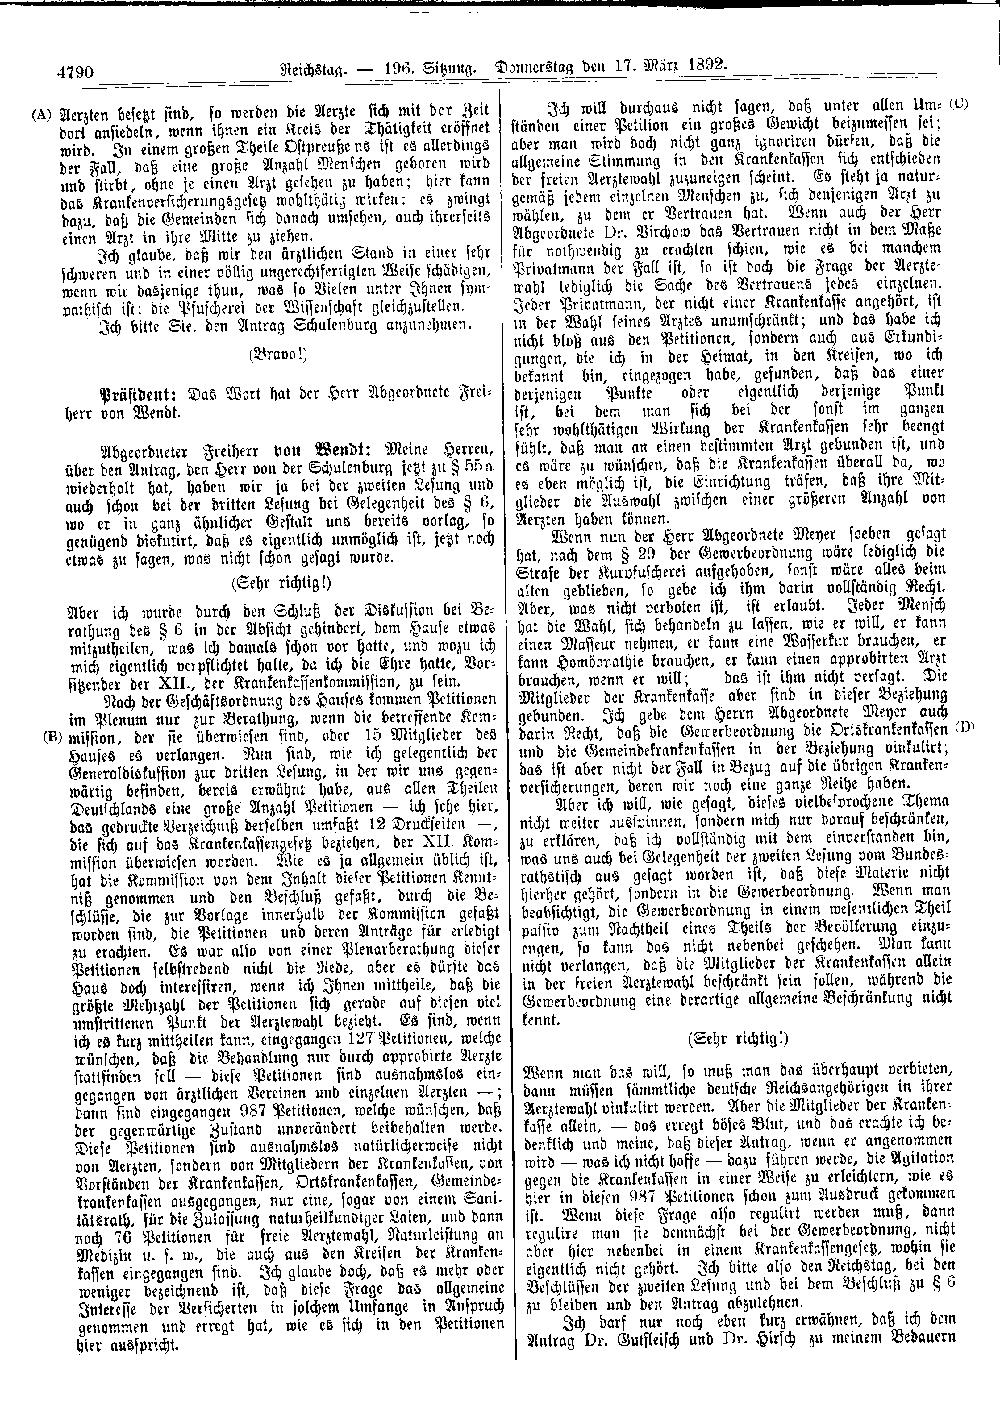 Scan of page 4790